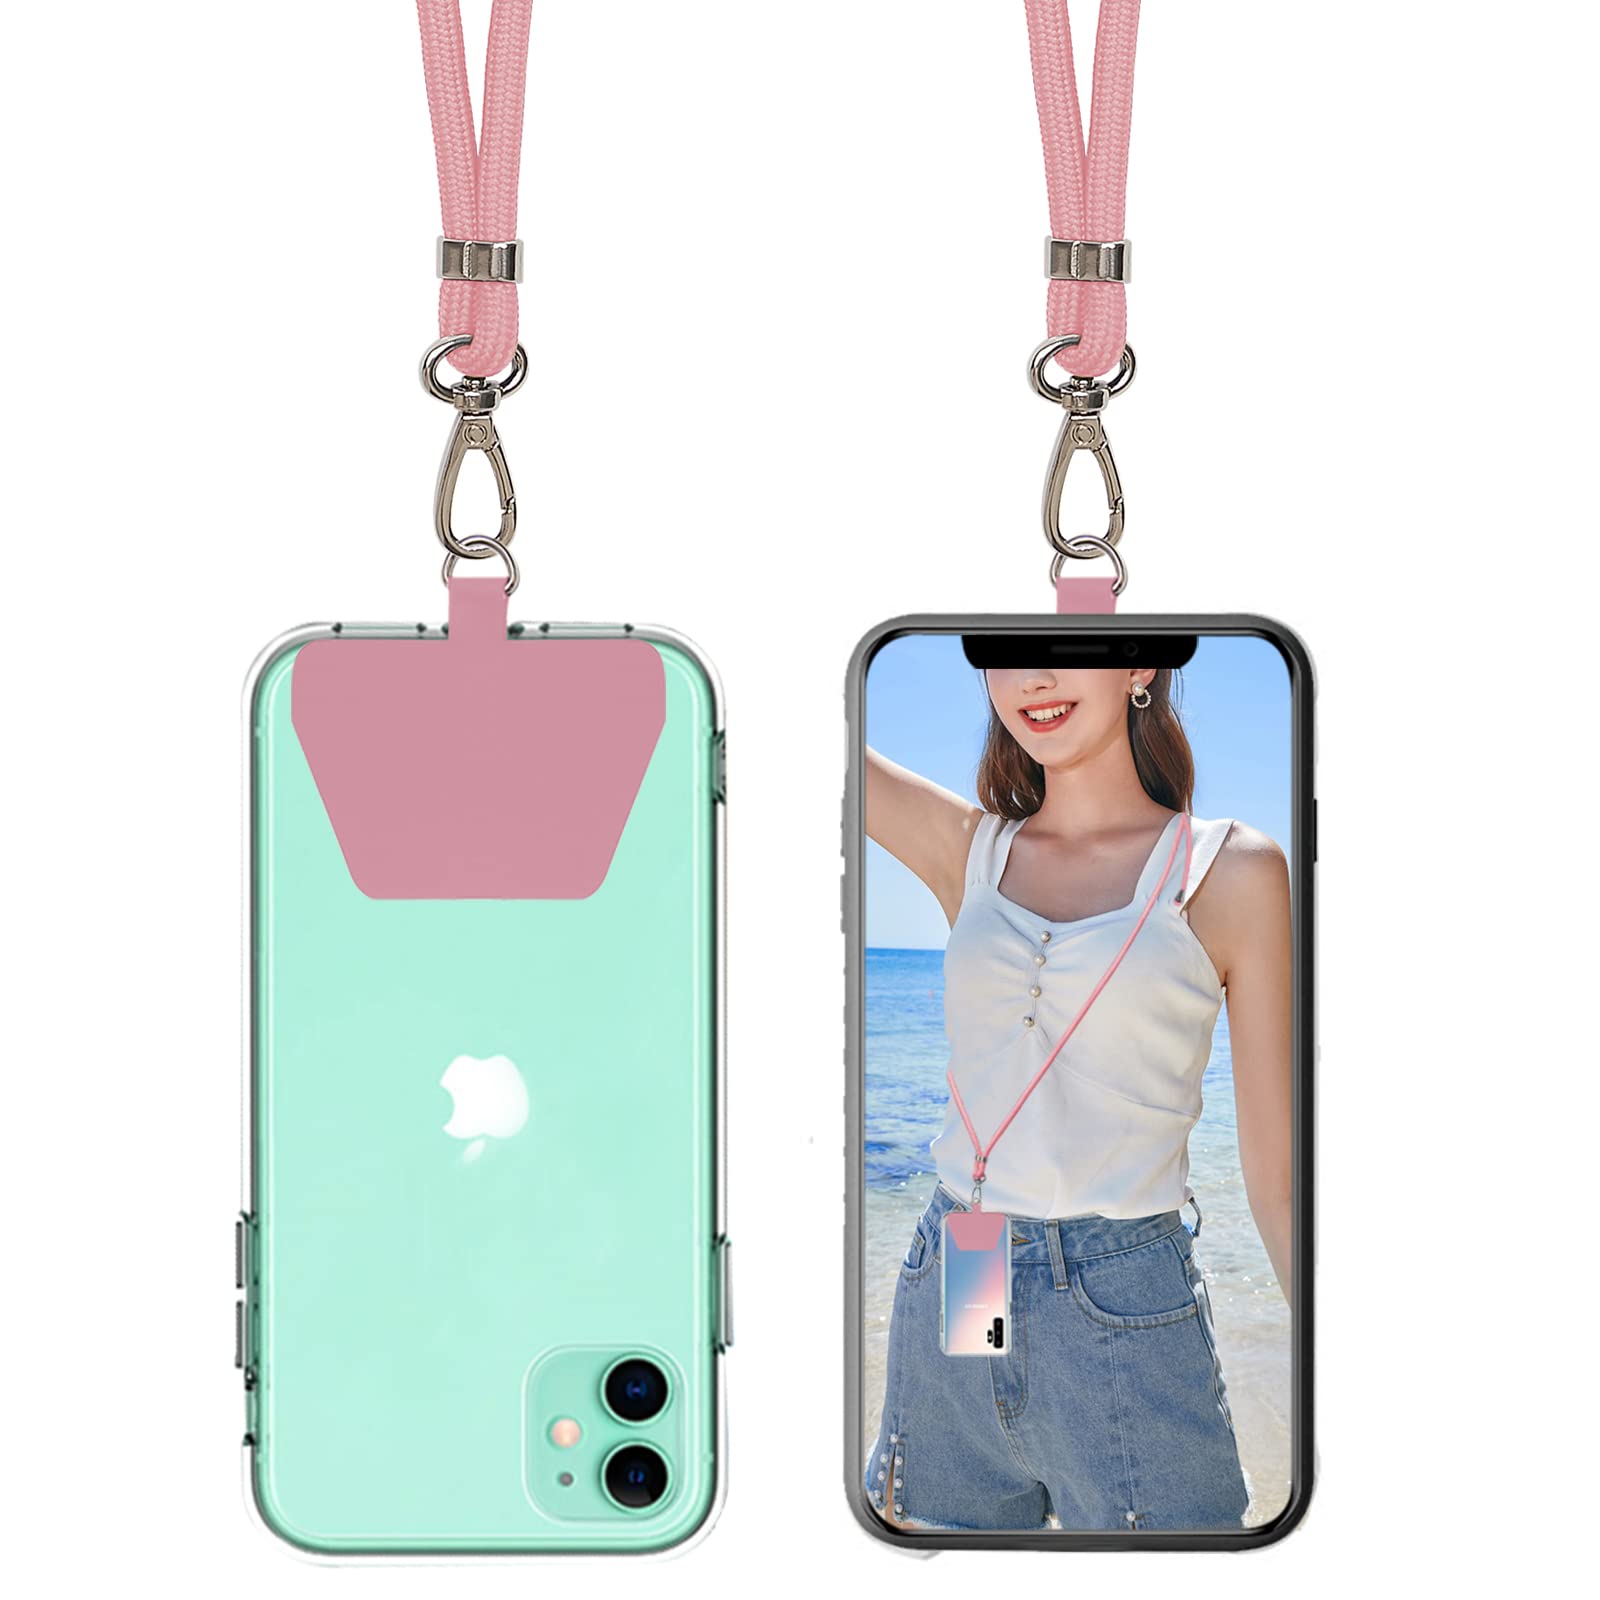 Ss Phone Lanyard Strap, Universal Neck Cord Lanyards Strap And Phone Tether Patch For All Phones And Case Combinations (Pink)